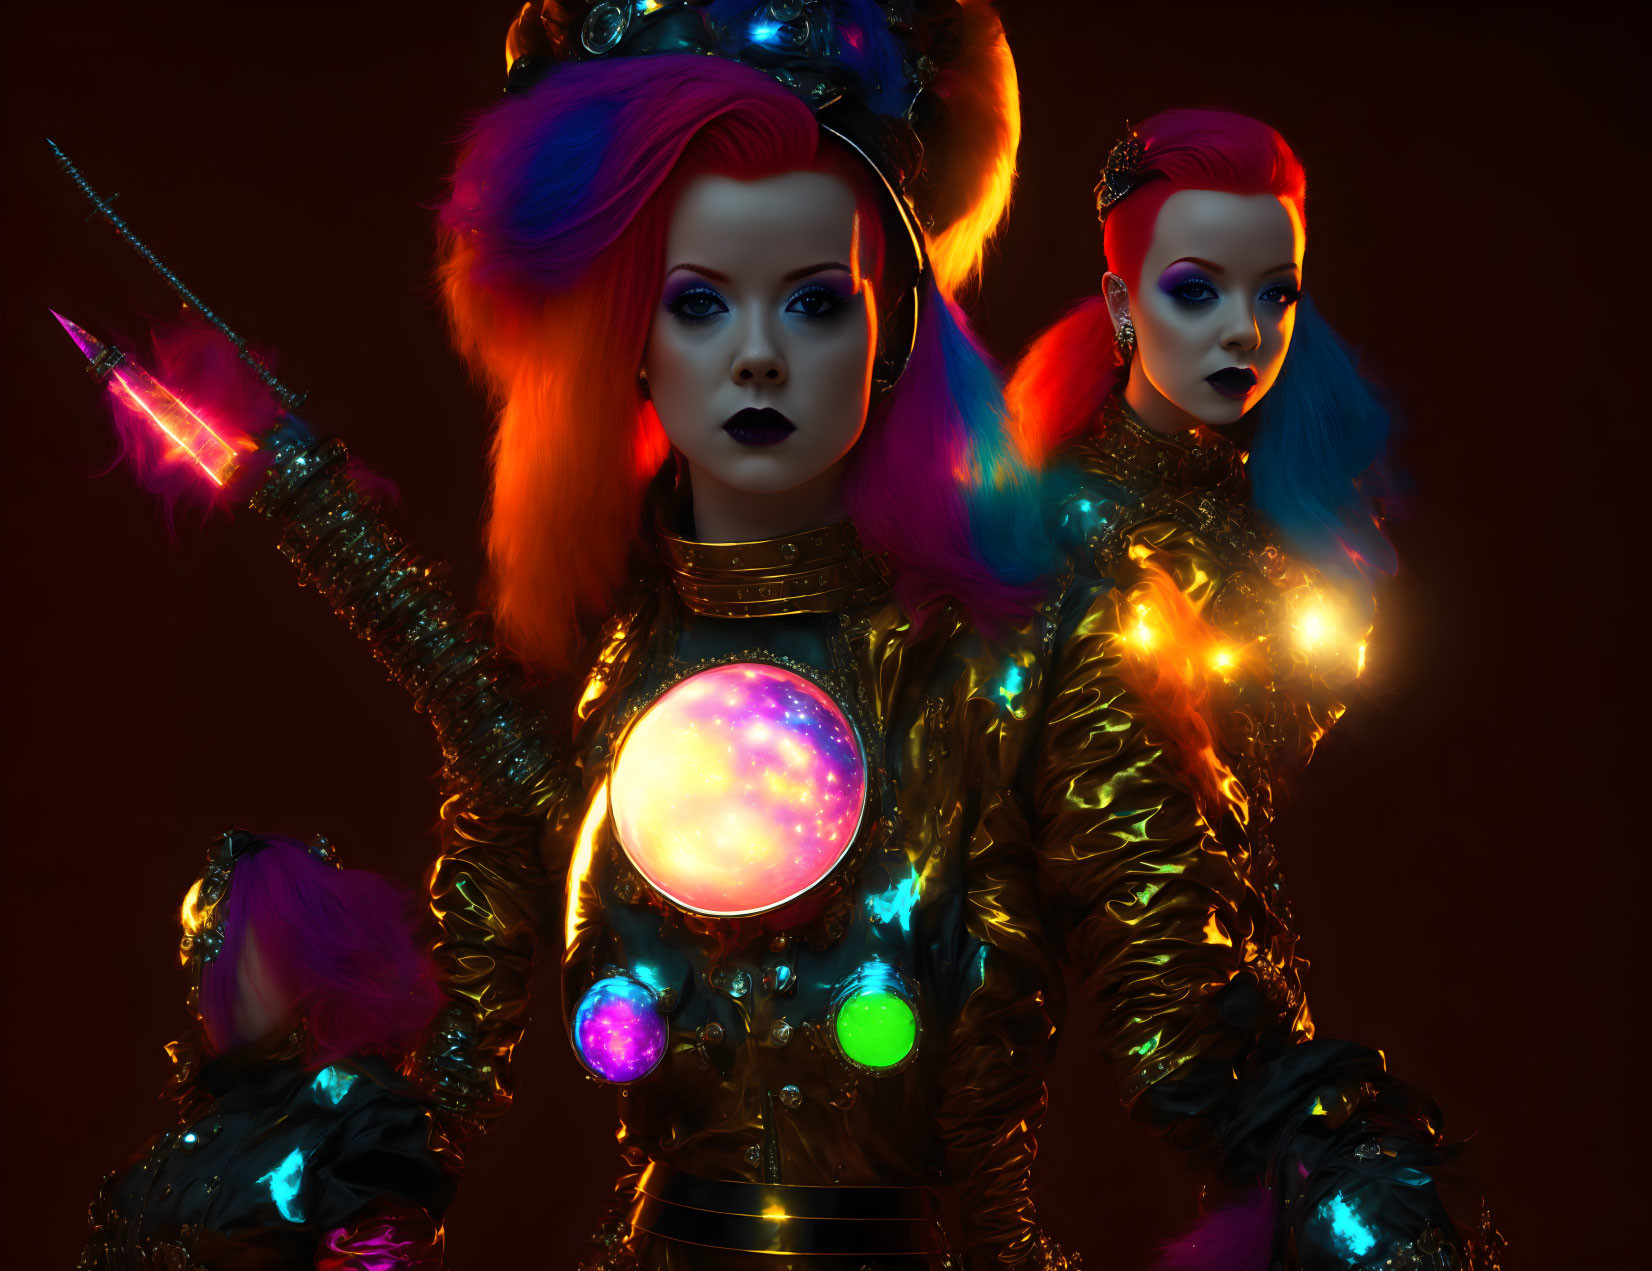 Futuristic women with vibrant hair in illuminated space suits on dark red backdrop